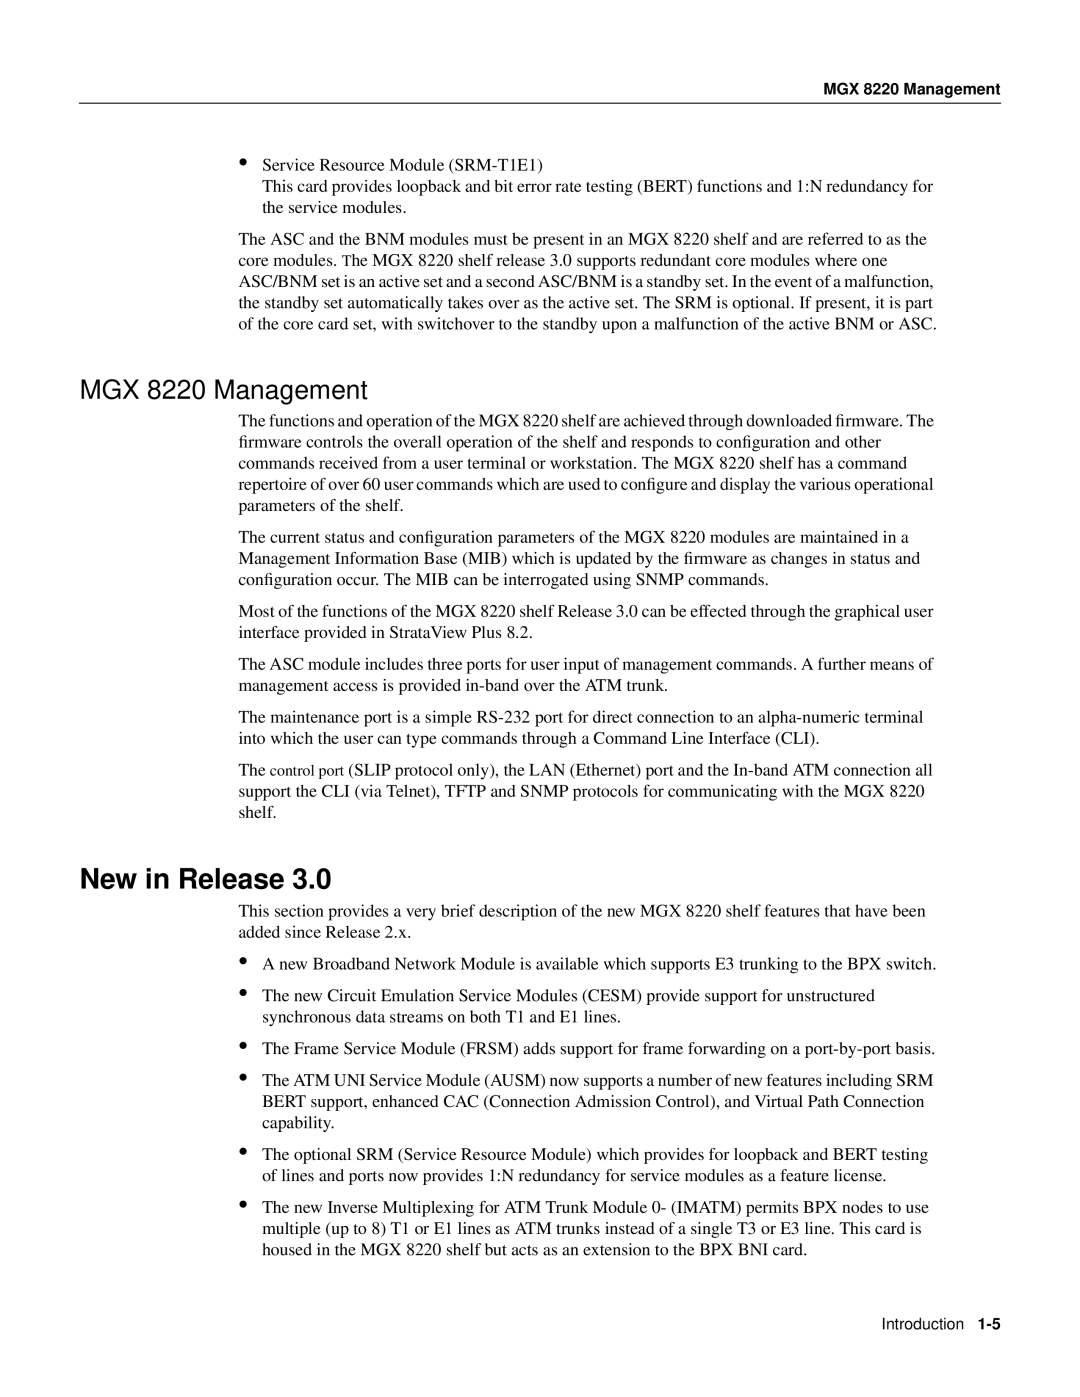 Cisco Systems manual New in Release, MGX 8220 Management 